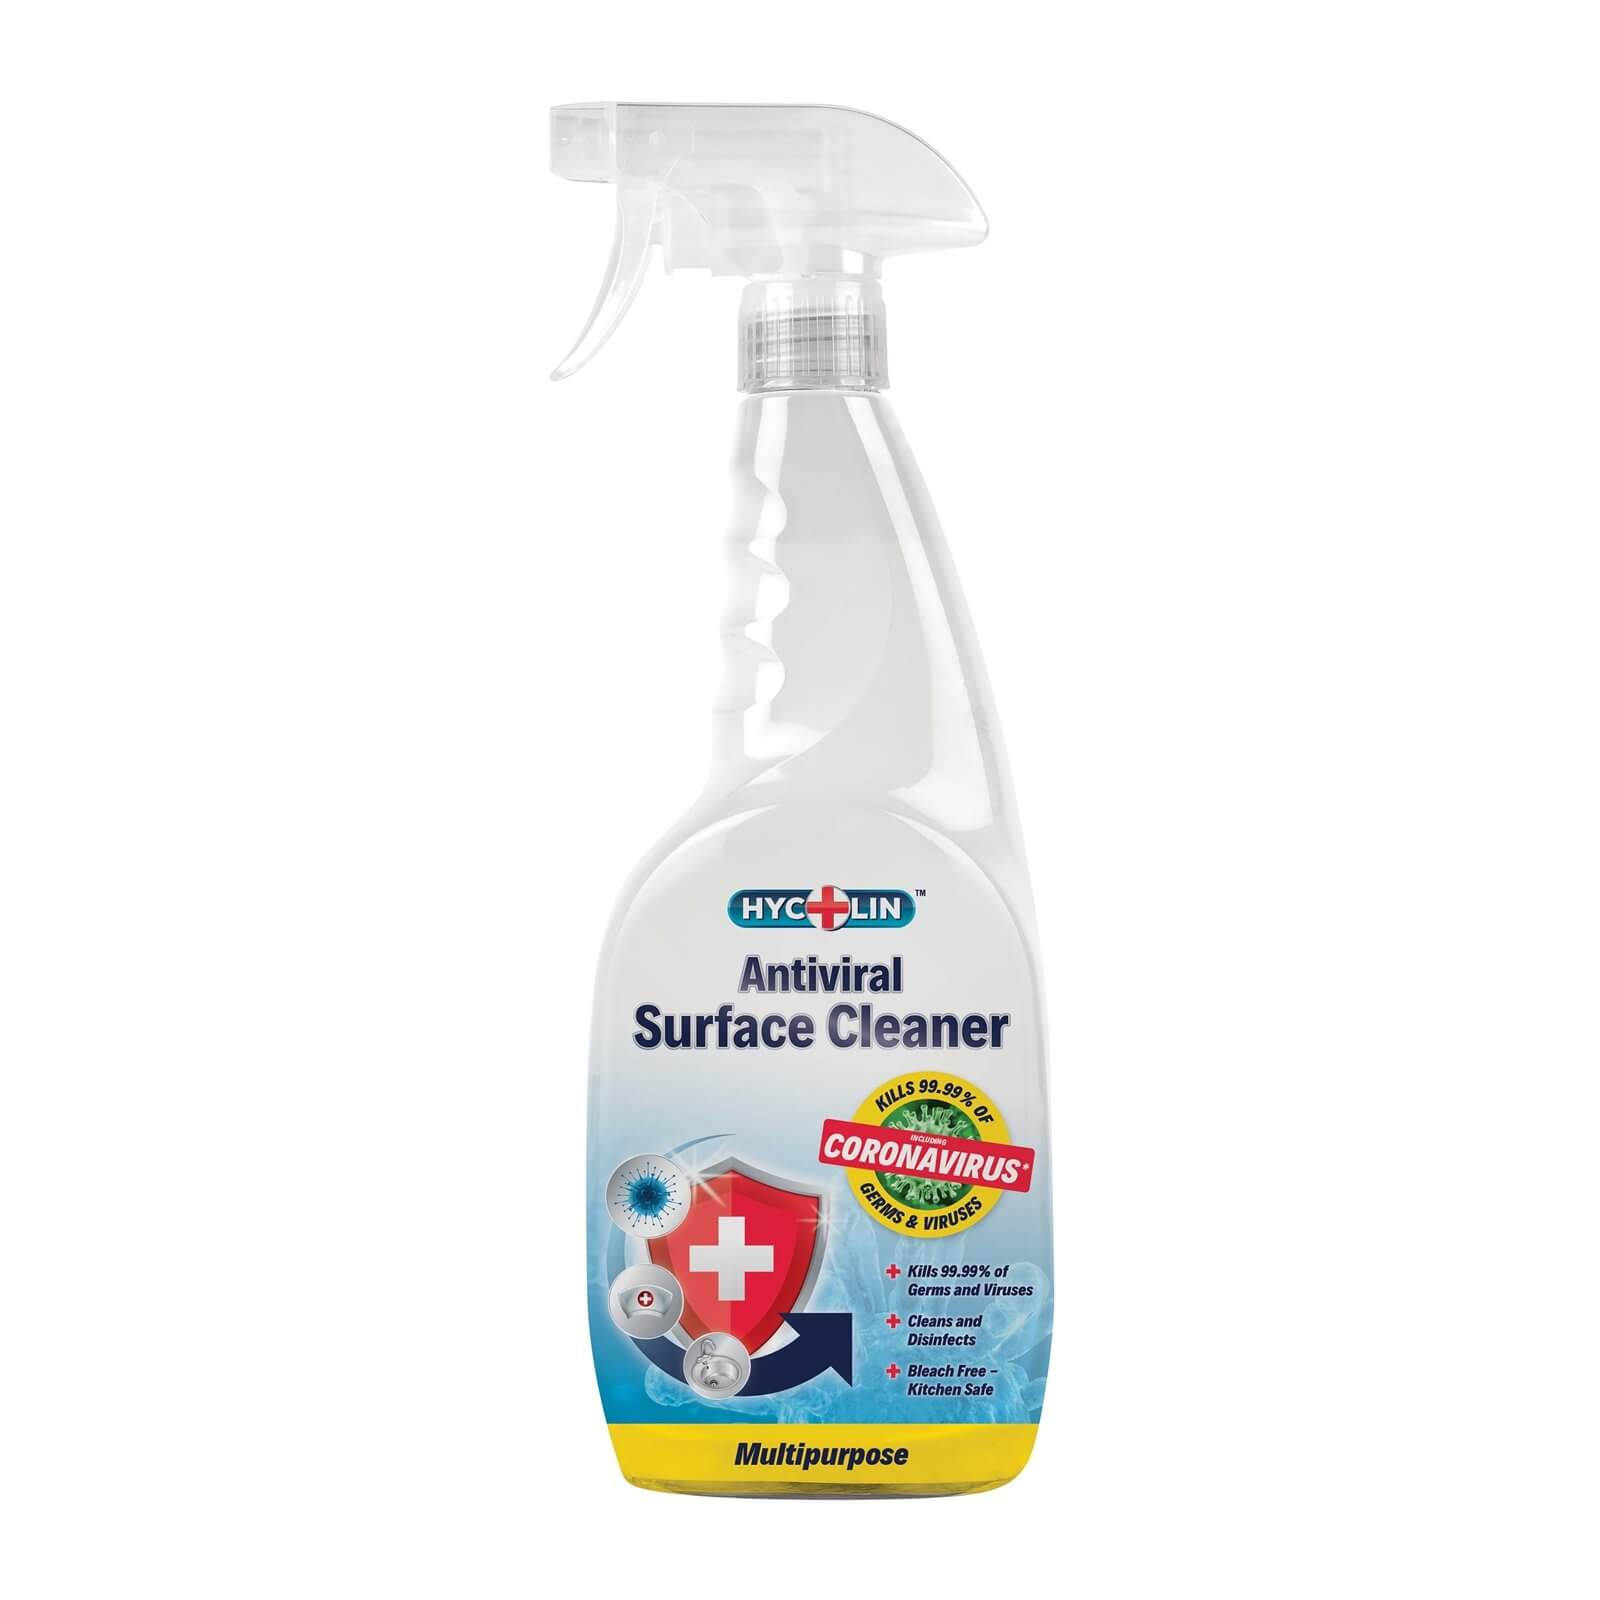 Hycolin Antiviral Surface Cleaner